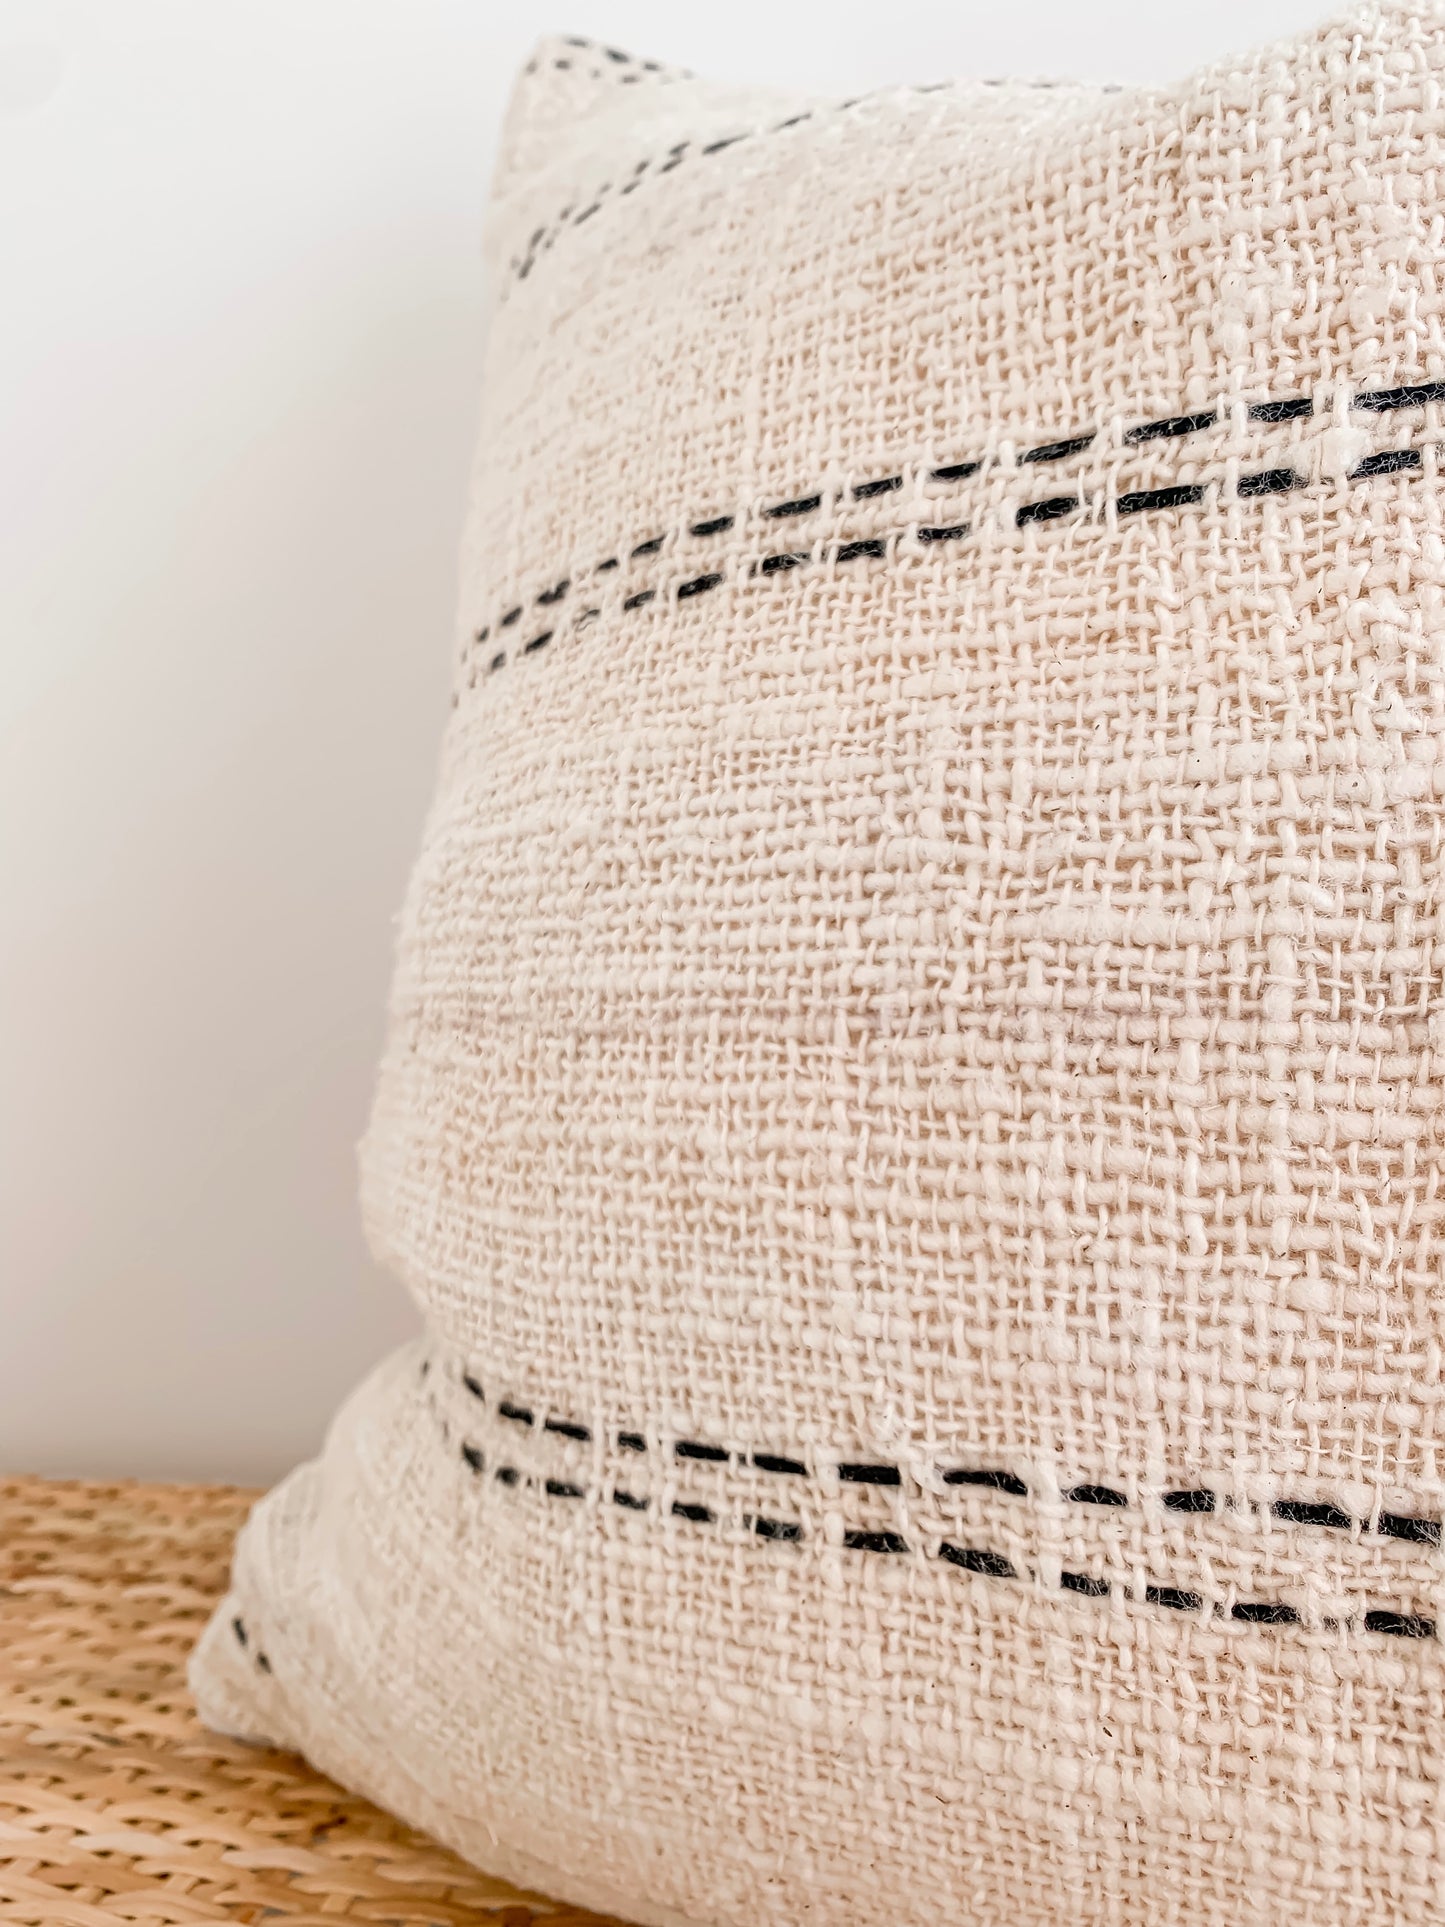 A Nyah | Stitch cushion cover in black and white stripes on a wooden table. (Brand: Barre Living)